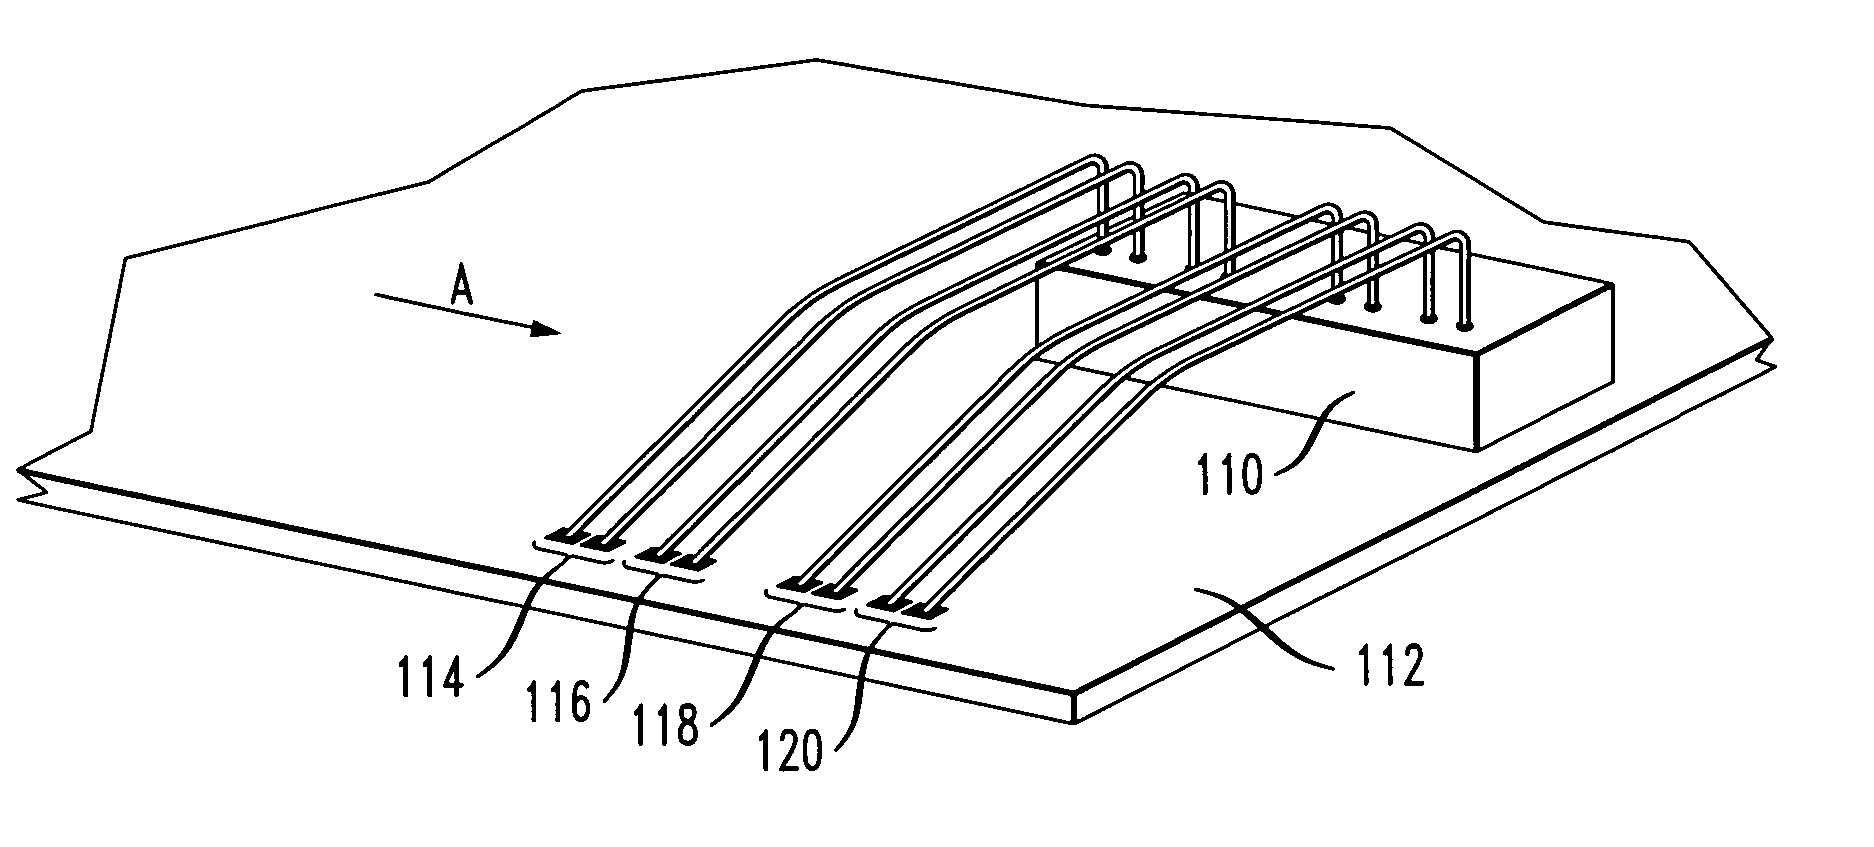 Integrated circuit with staggered differential wire bond pairs